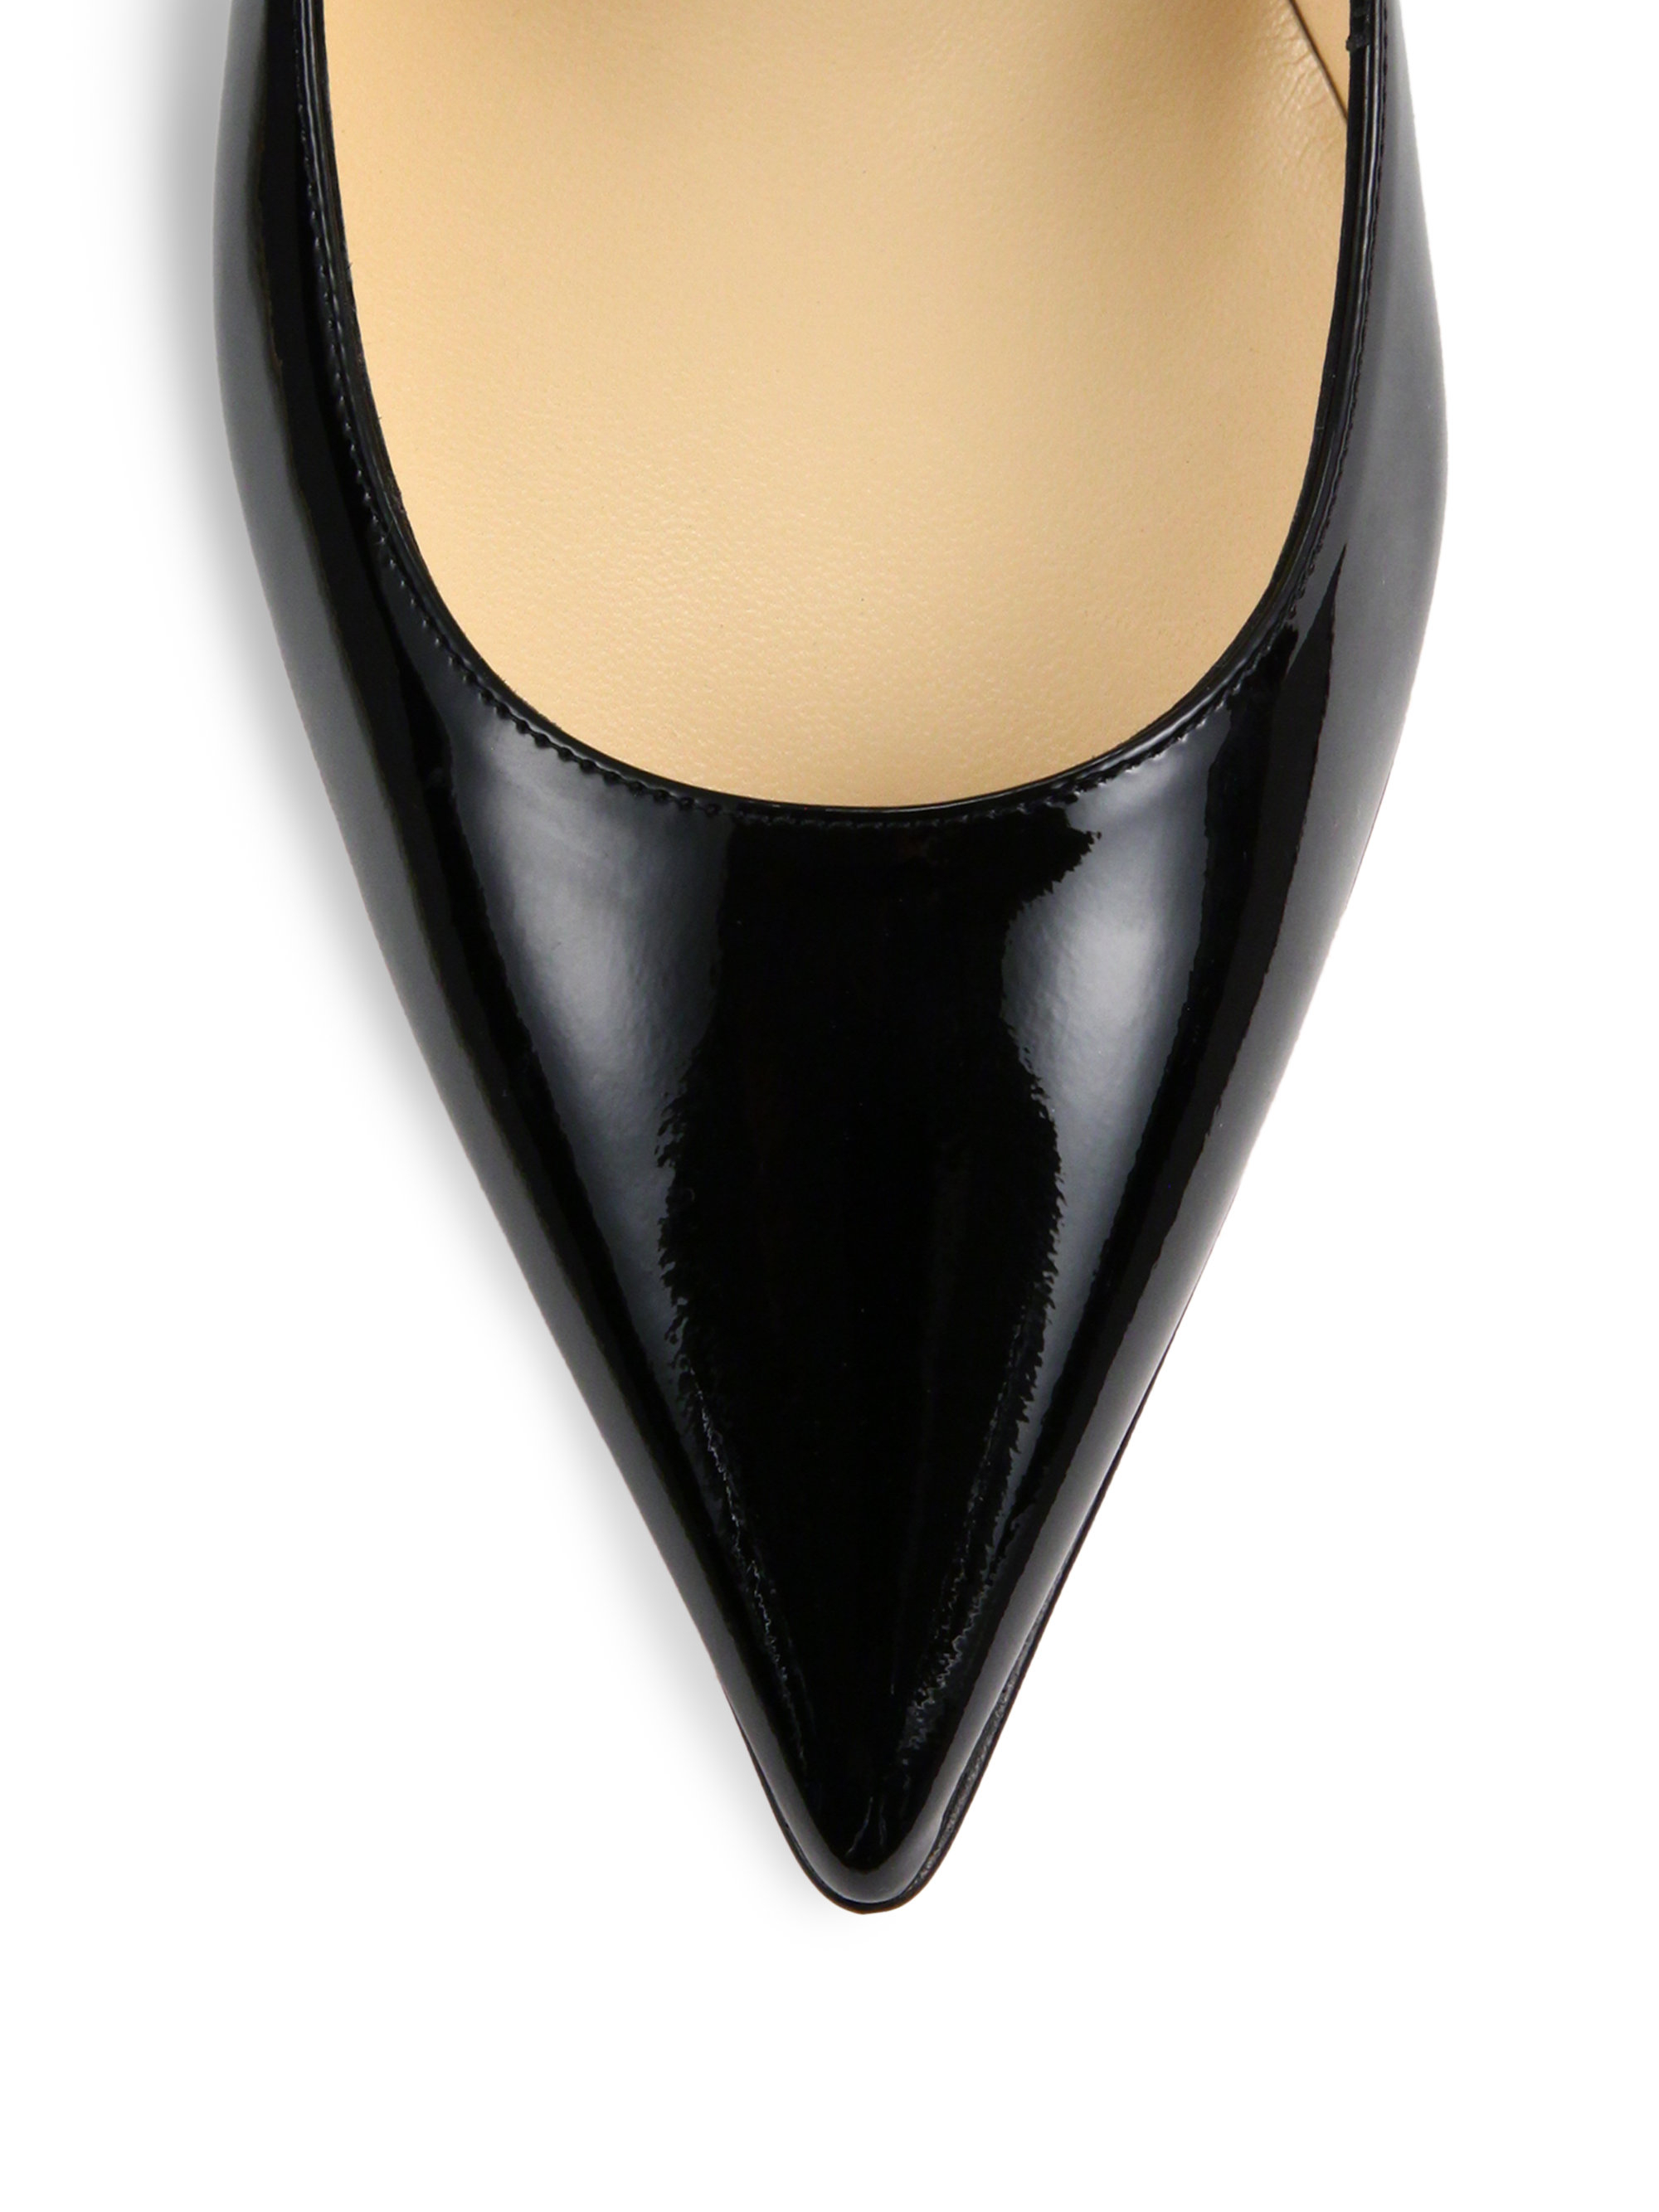 christian louboutin pointed-toe flats Black patent leather covered ...